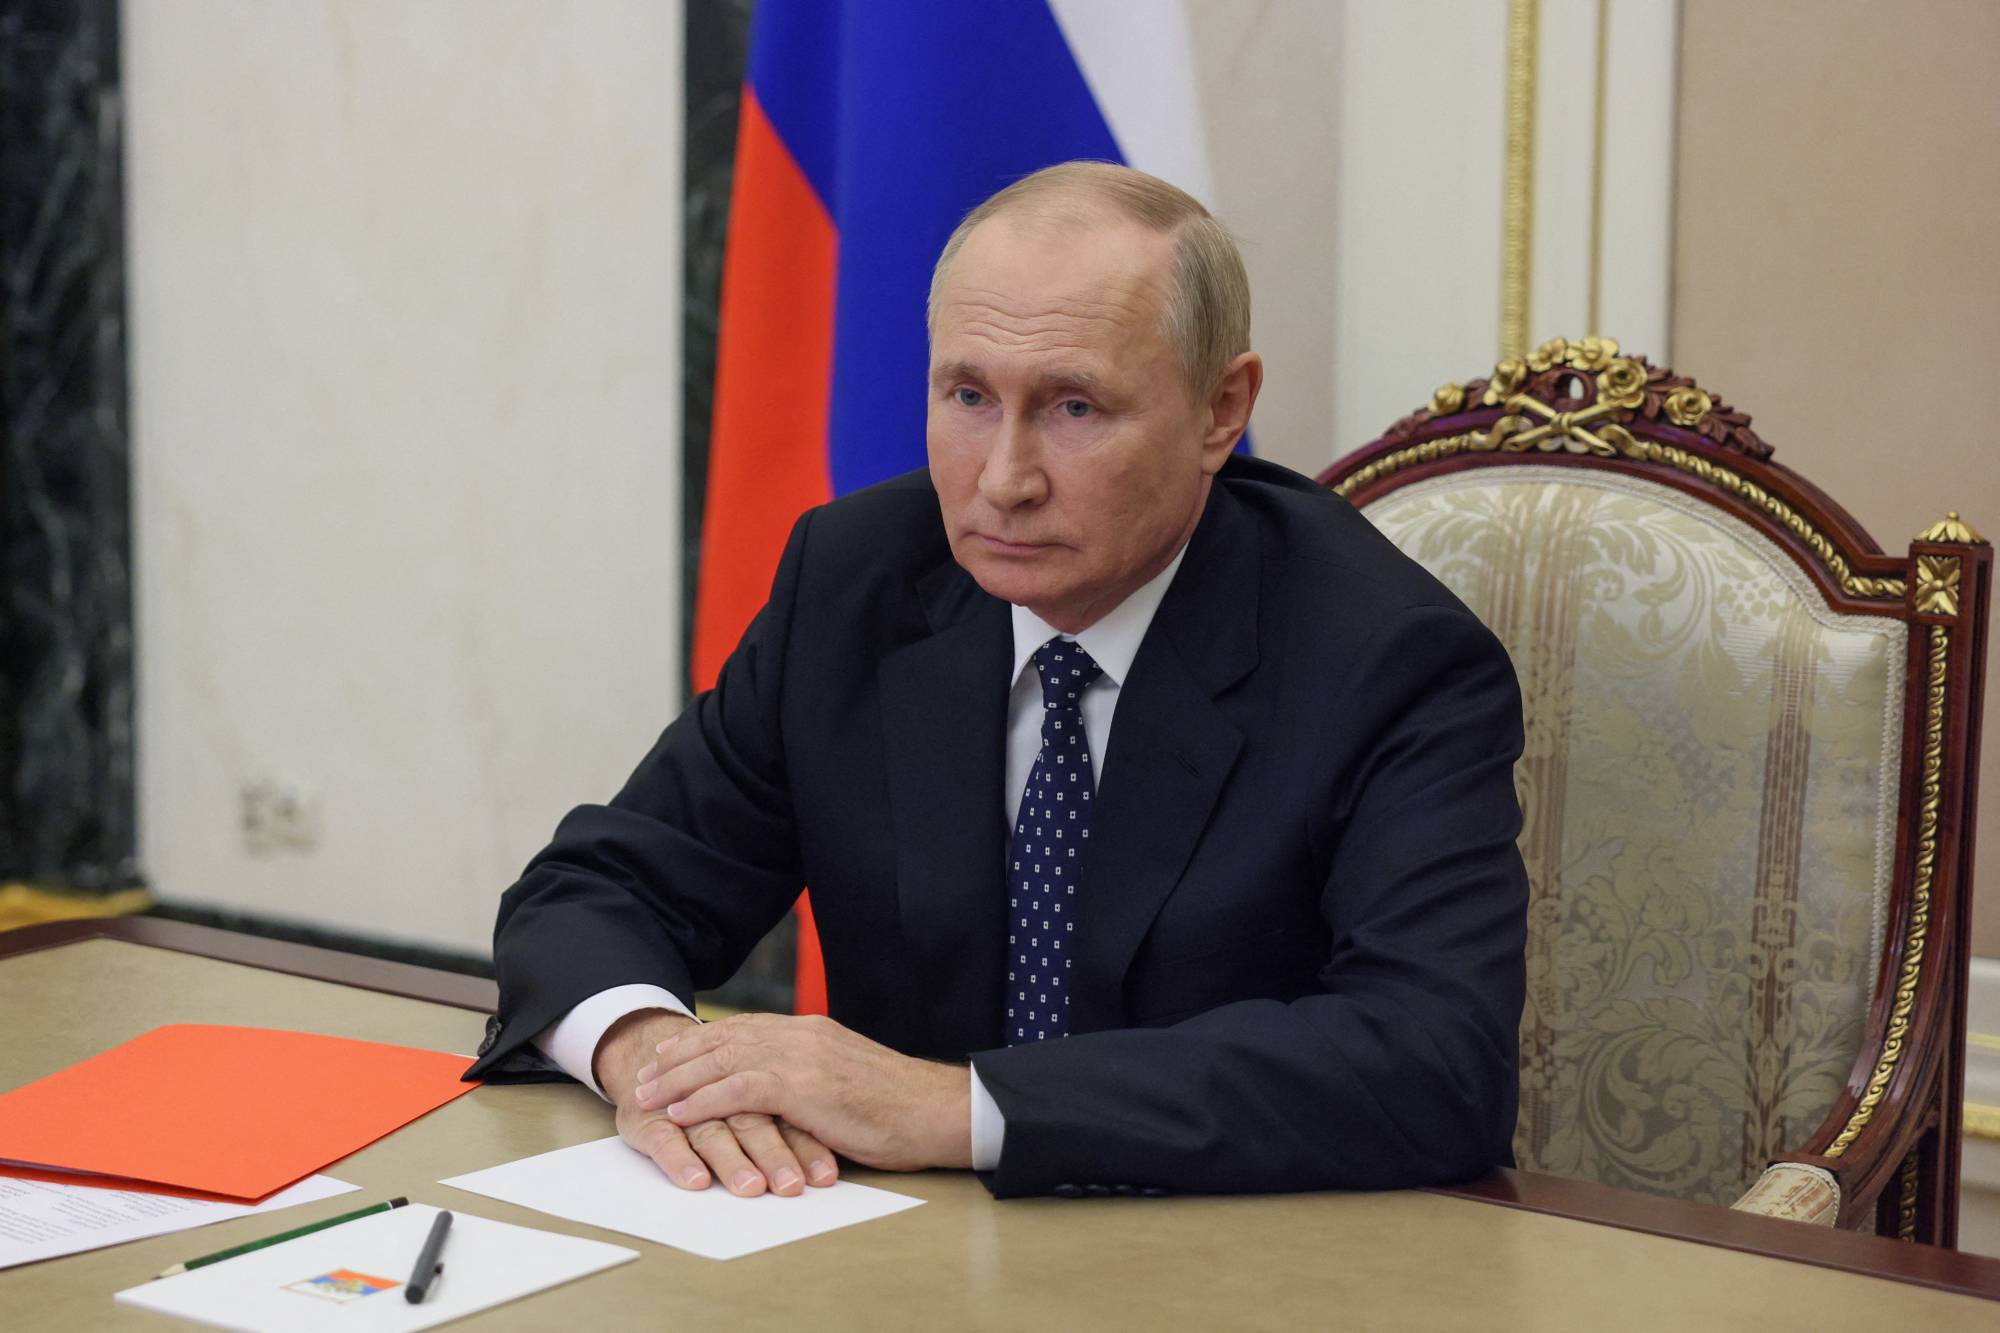 Russian President Vladimir Putin chairs a meeting with members of the Security Council via video link at the Kremlin in Moscow, Russia September 23, 2022.